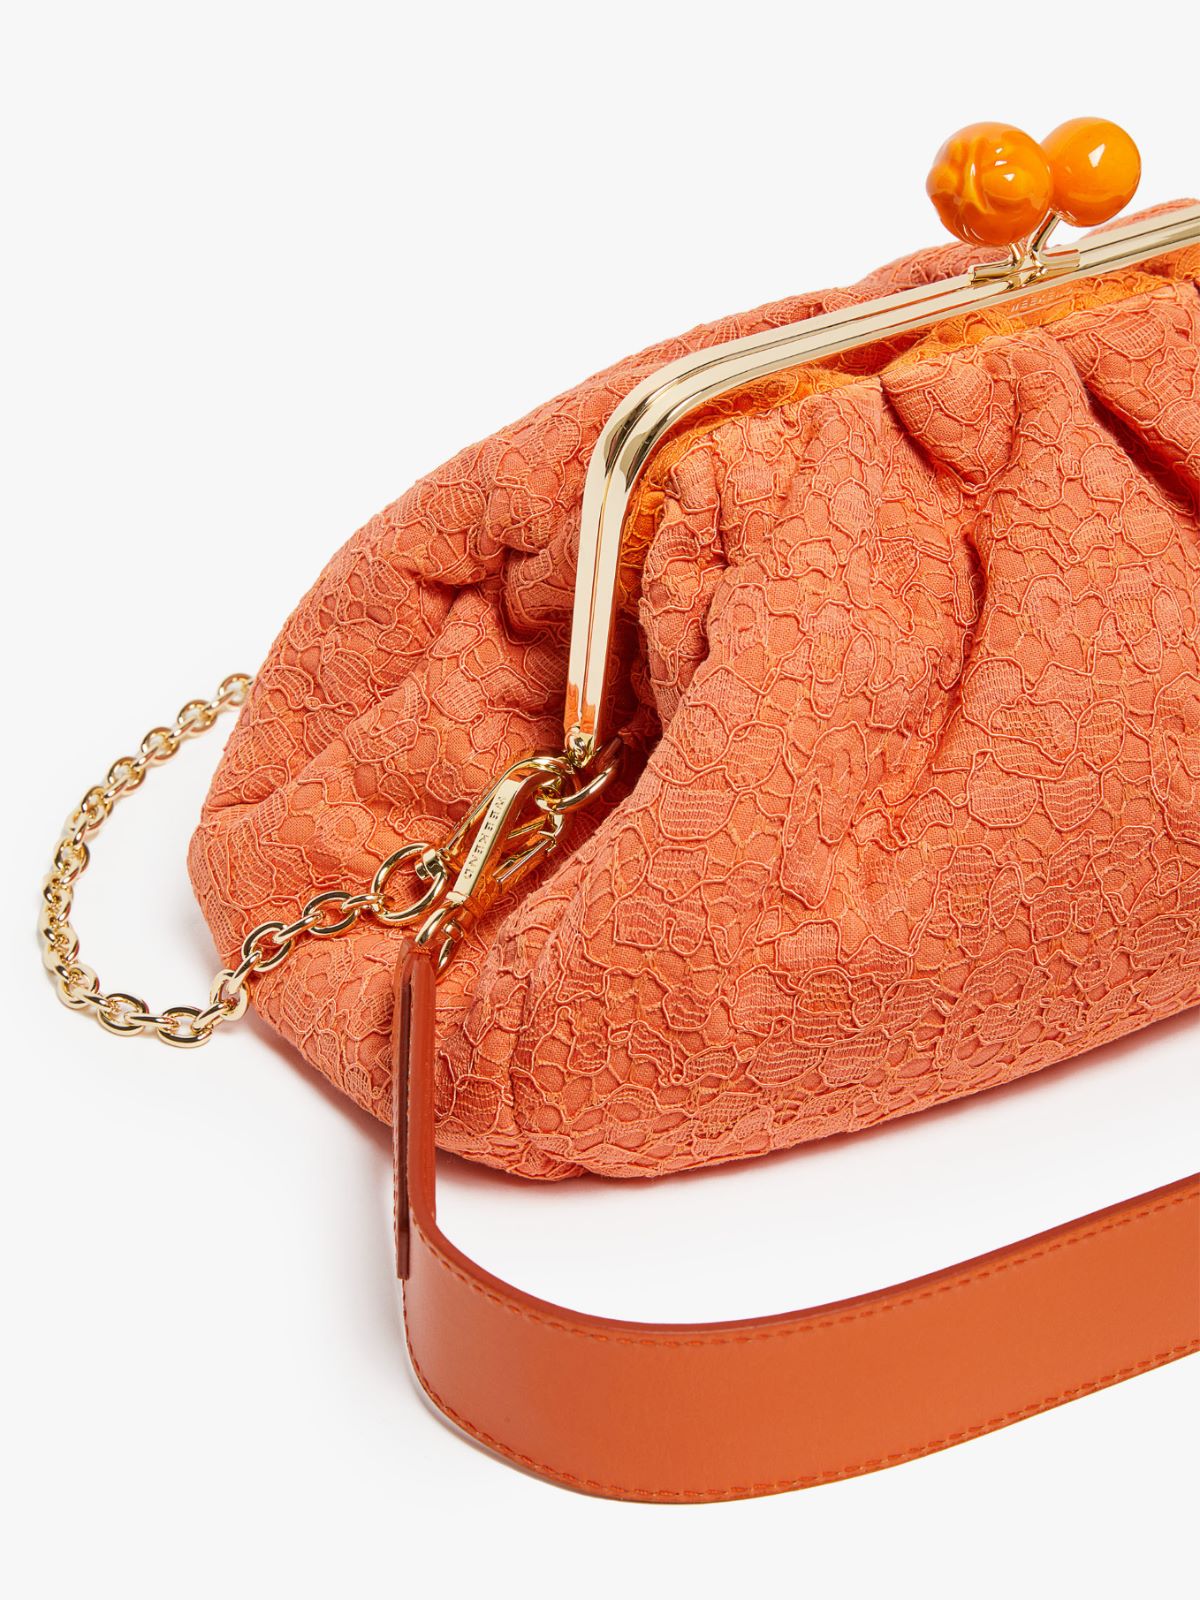 Hommage à la France Pasticcino Bag in lace - TANGERINE - Weekend Max Mara - 5